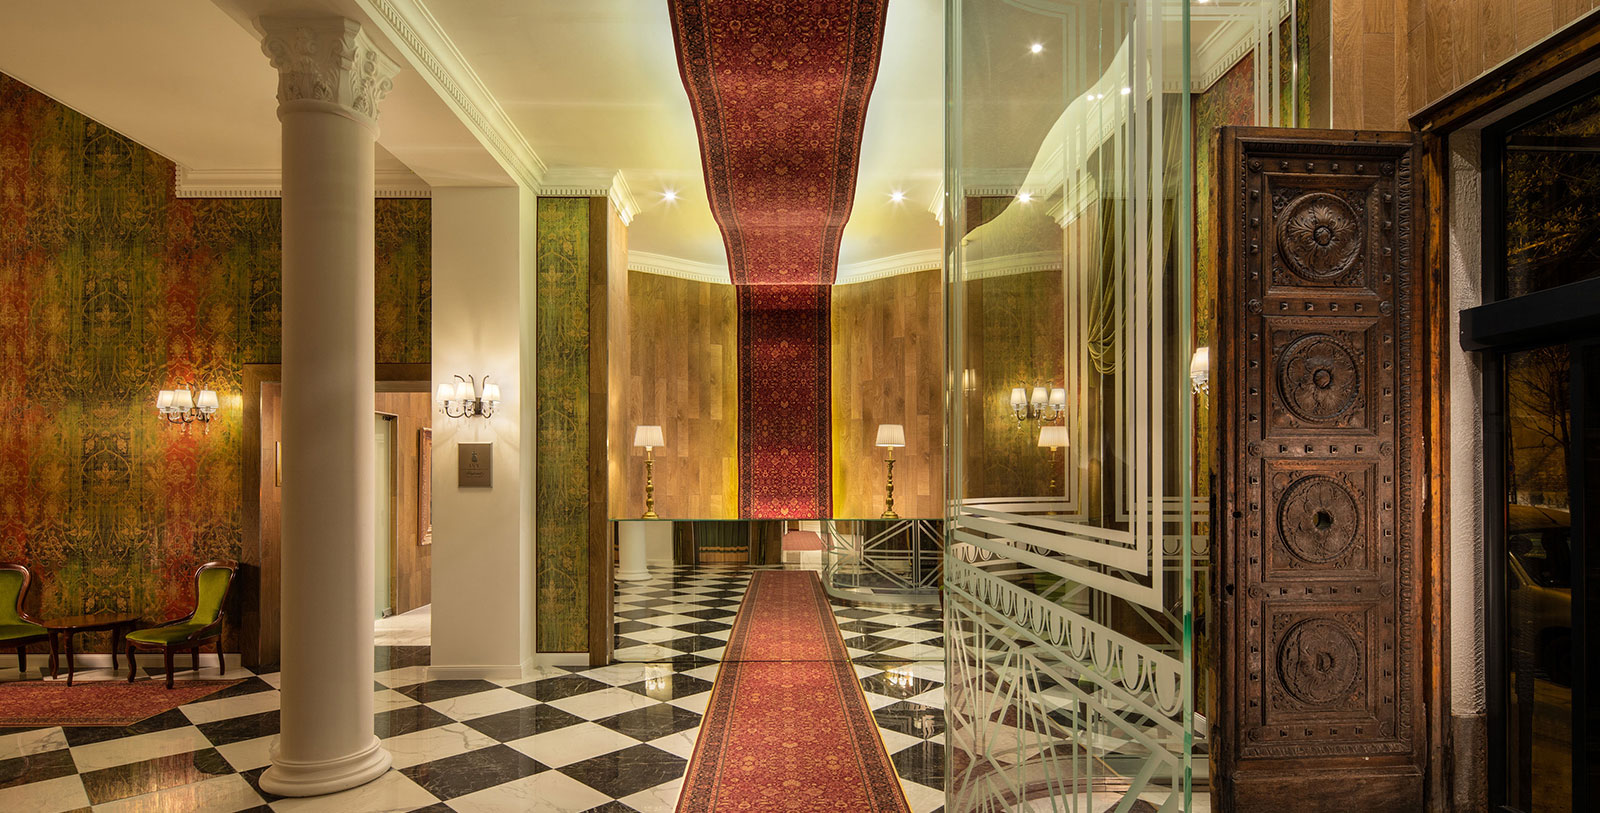 Image of Lobby, Mystery Hotel Budapest, 1896, Member of Historic Hotels Worldwide, Budapest, Hungary, Hot Deals